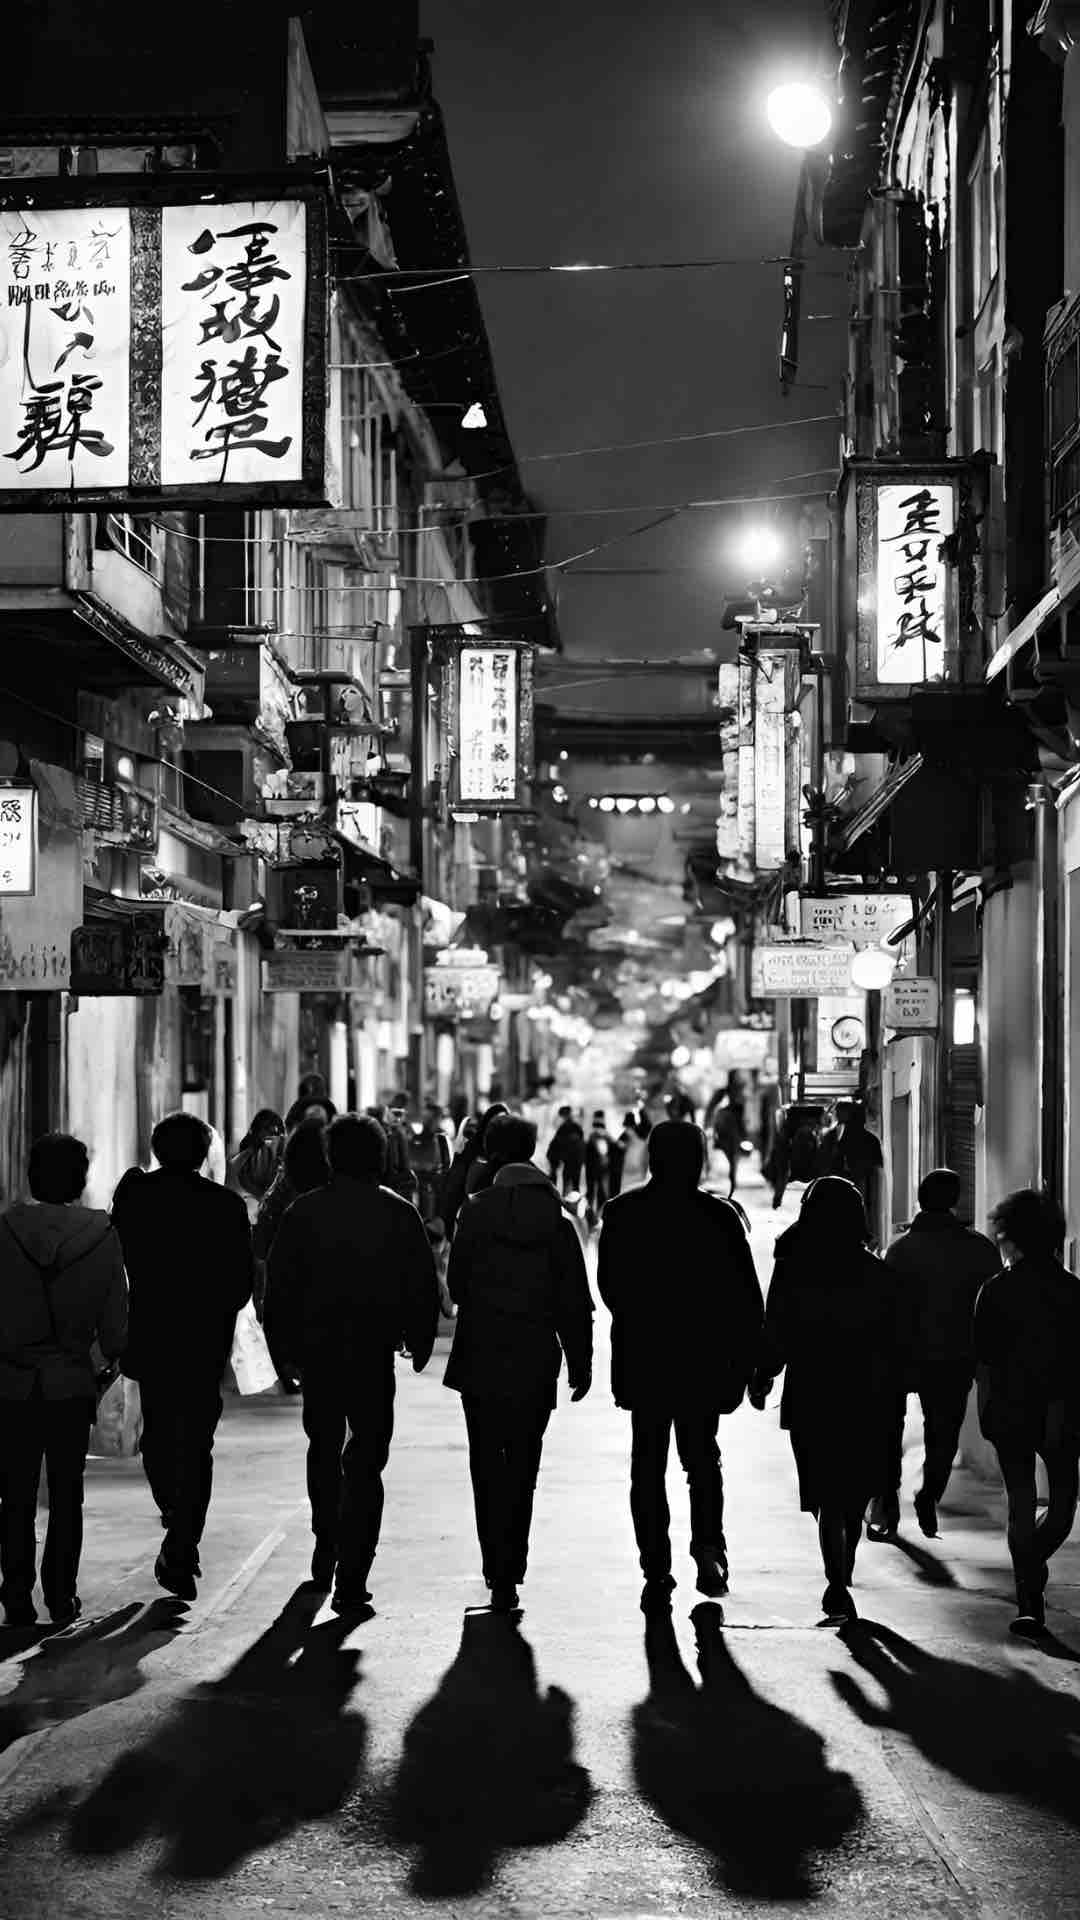 Group of people participating in a nighttime ghost tour in Chinatown, San Francisco, with a guide holding a lantern and storytelling near a historic alley.